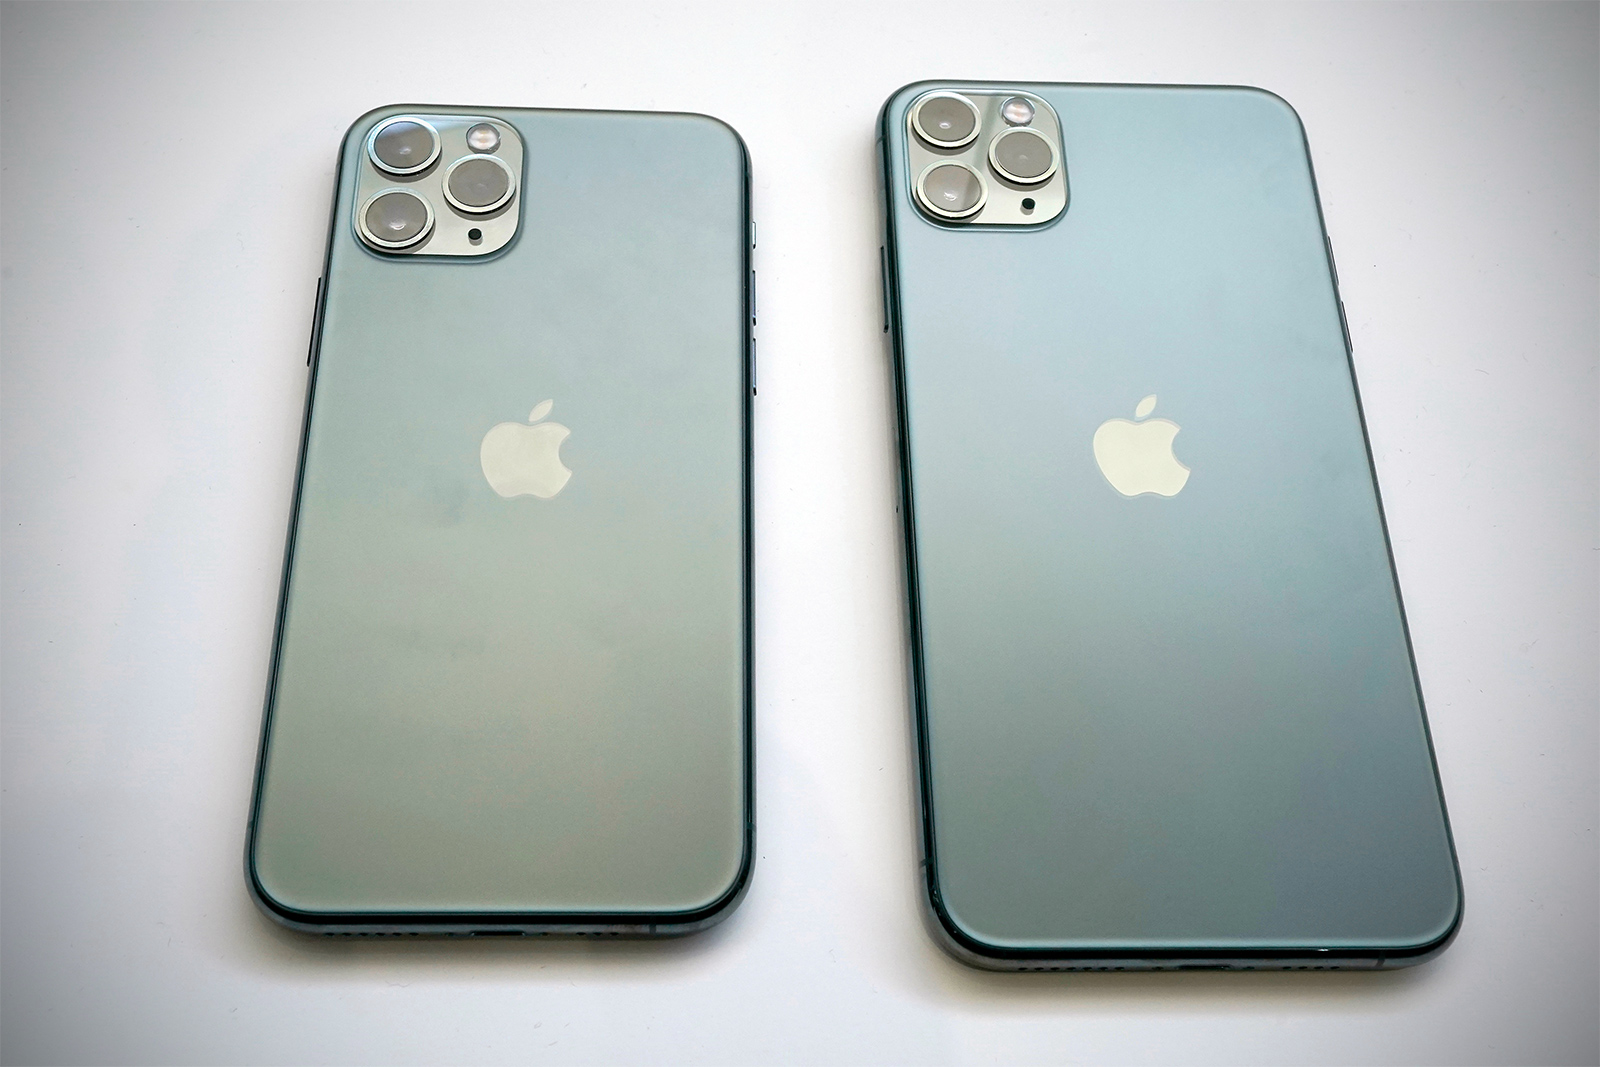 Iphone 11 Unboxing Photos Hit The Internet Days Before The Official Release Bgr